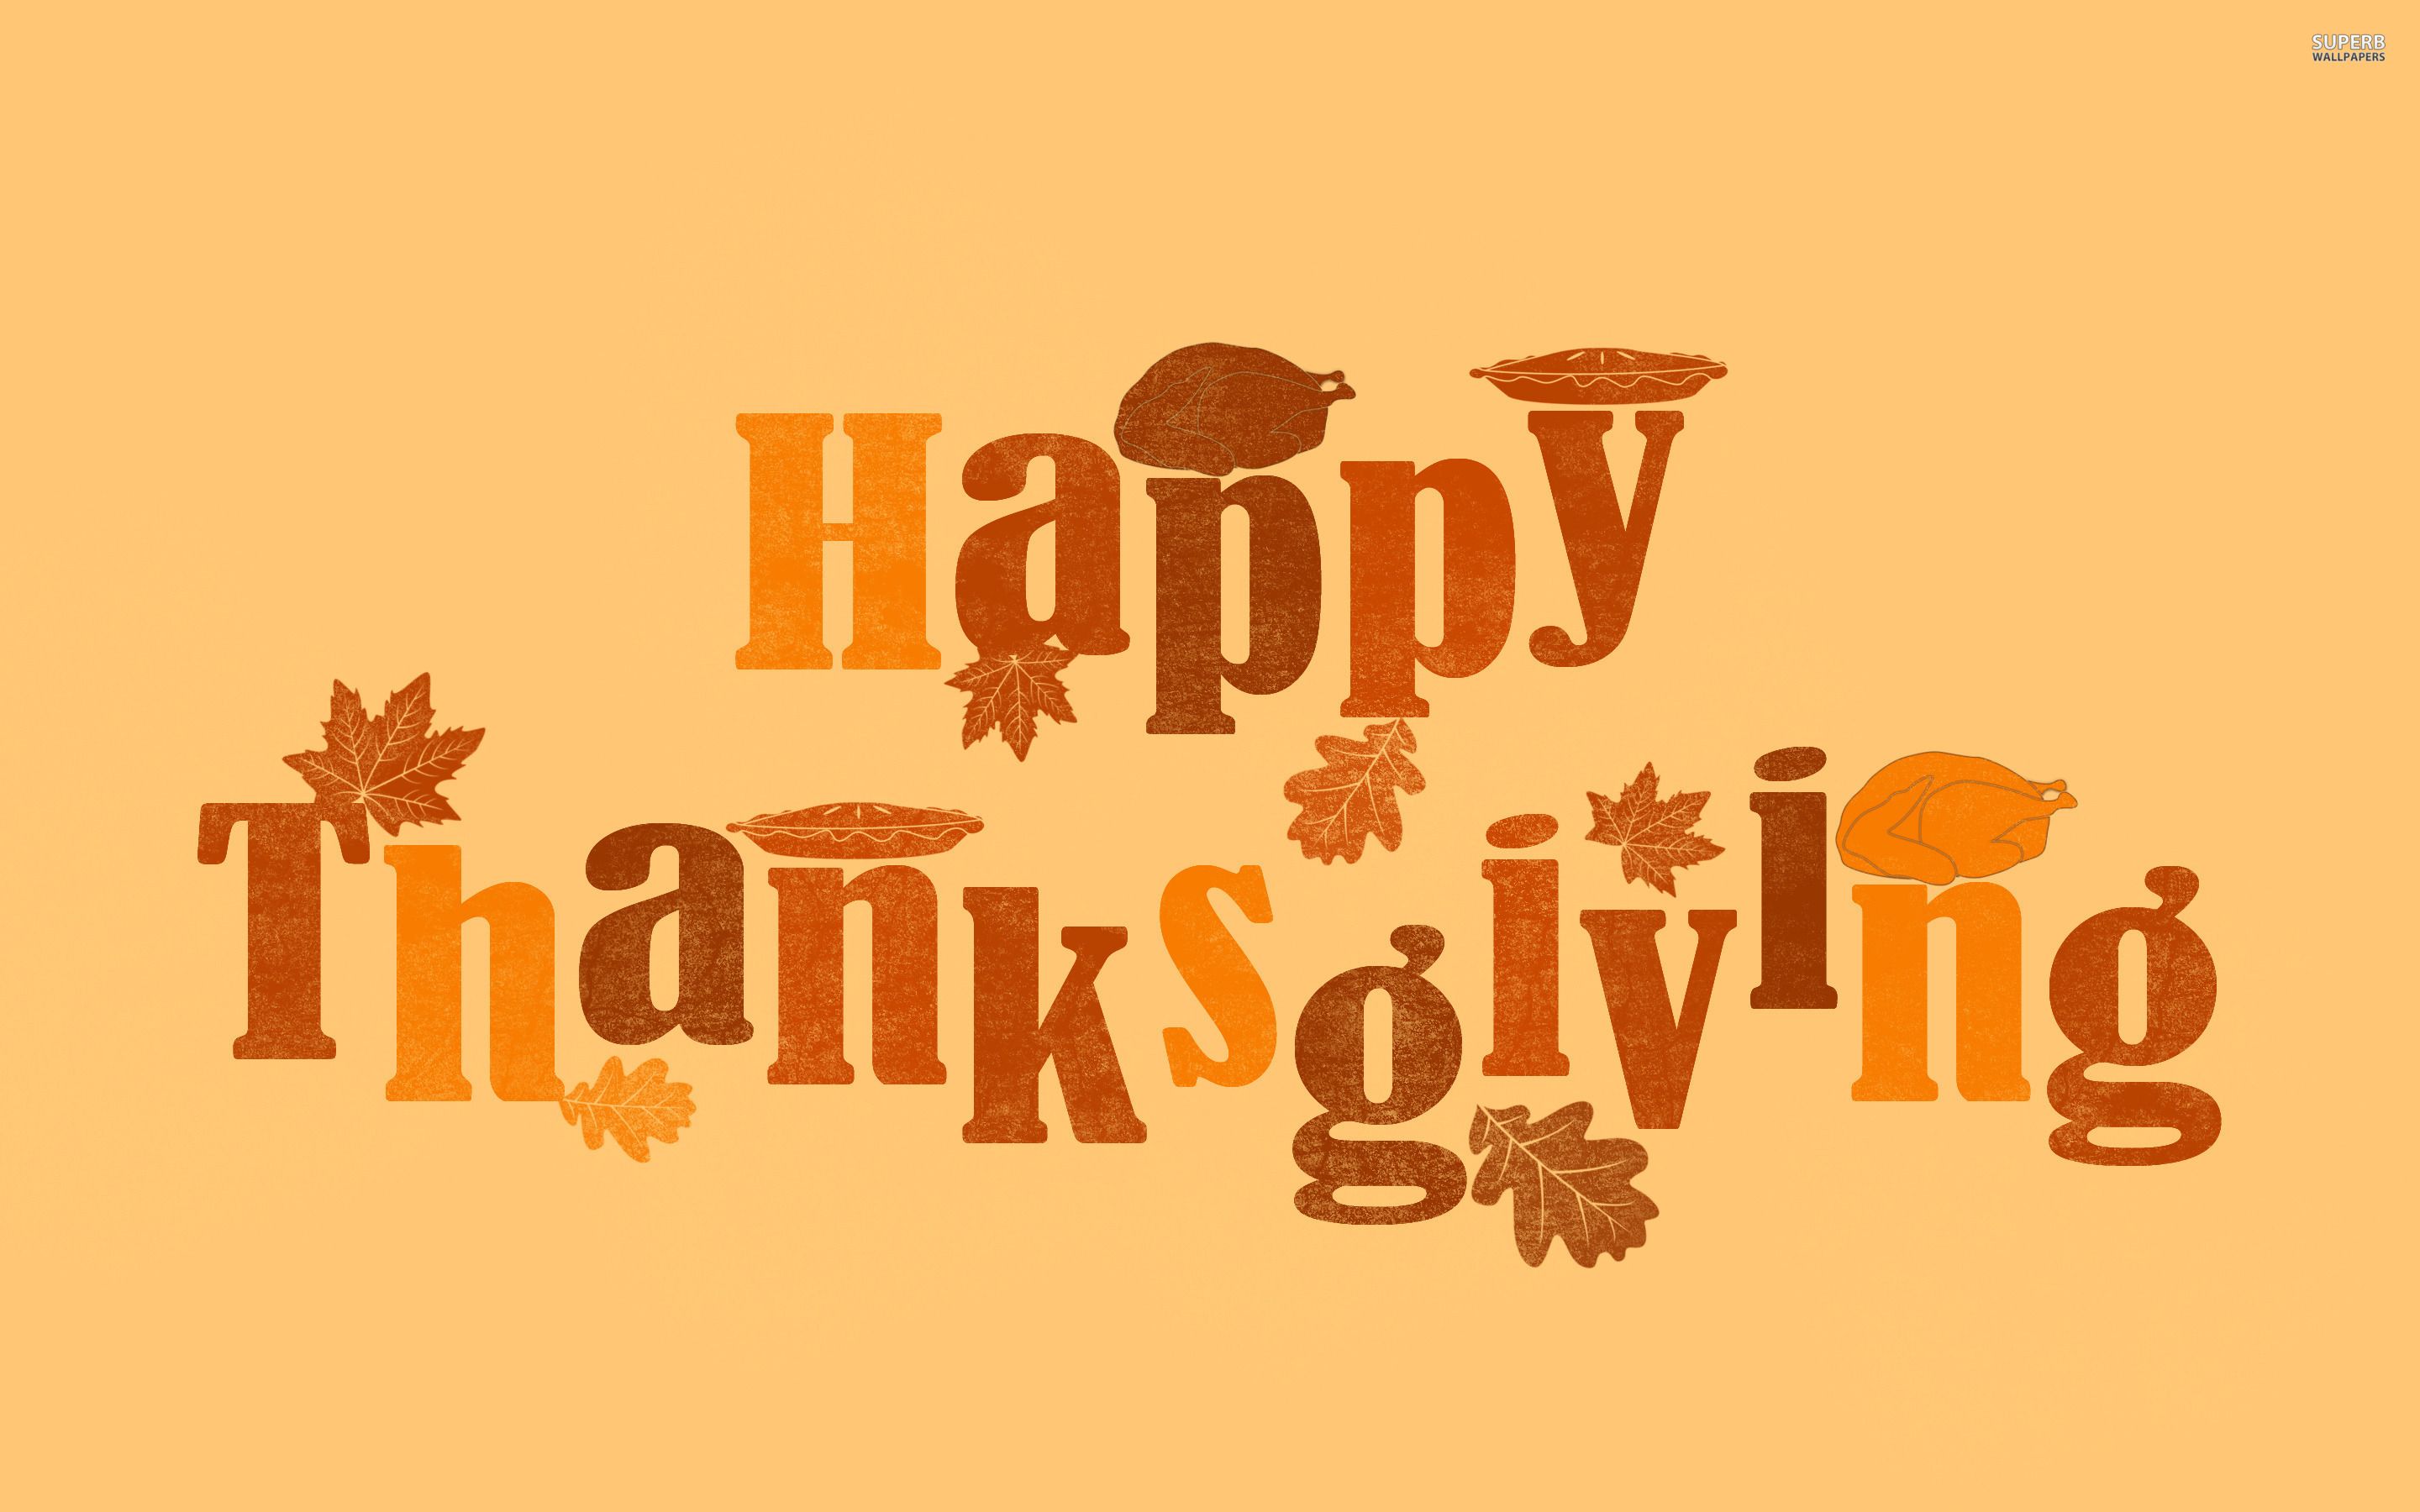 Happy Thanksgiving : Desktop and mobile wallpaper : Wallippo